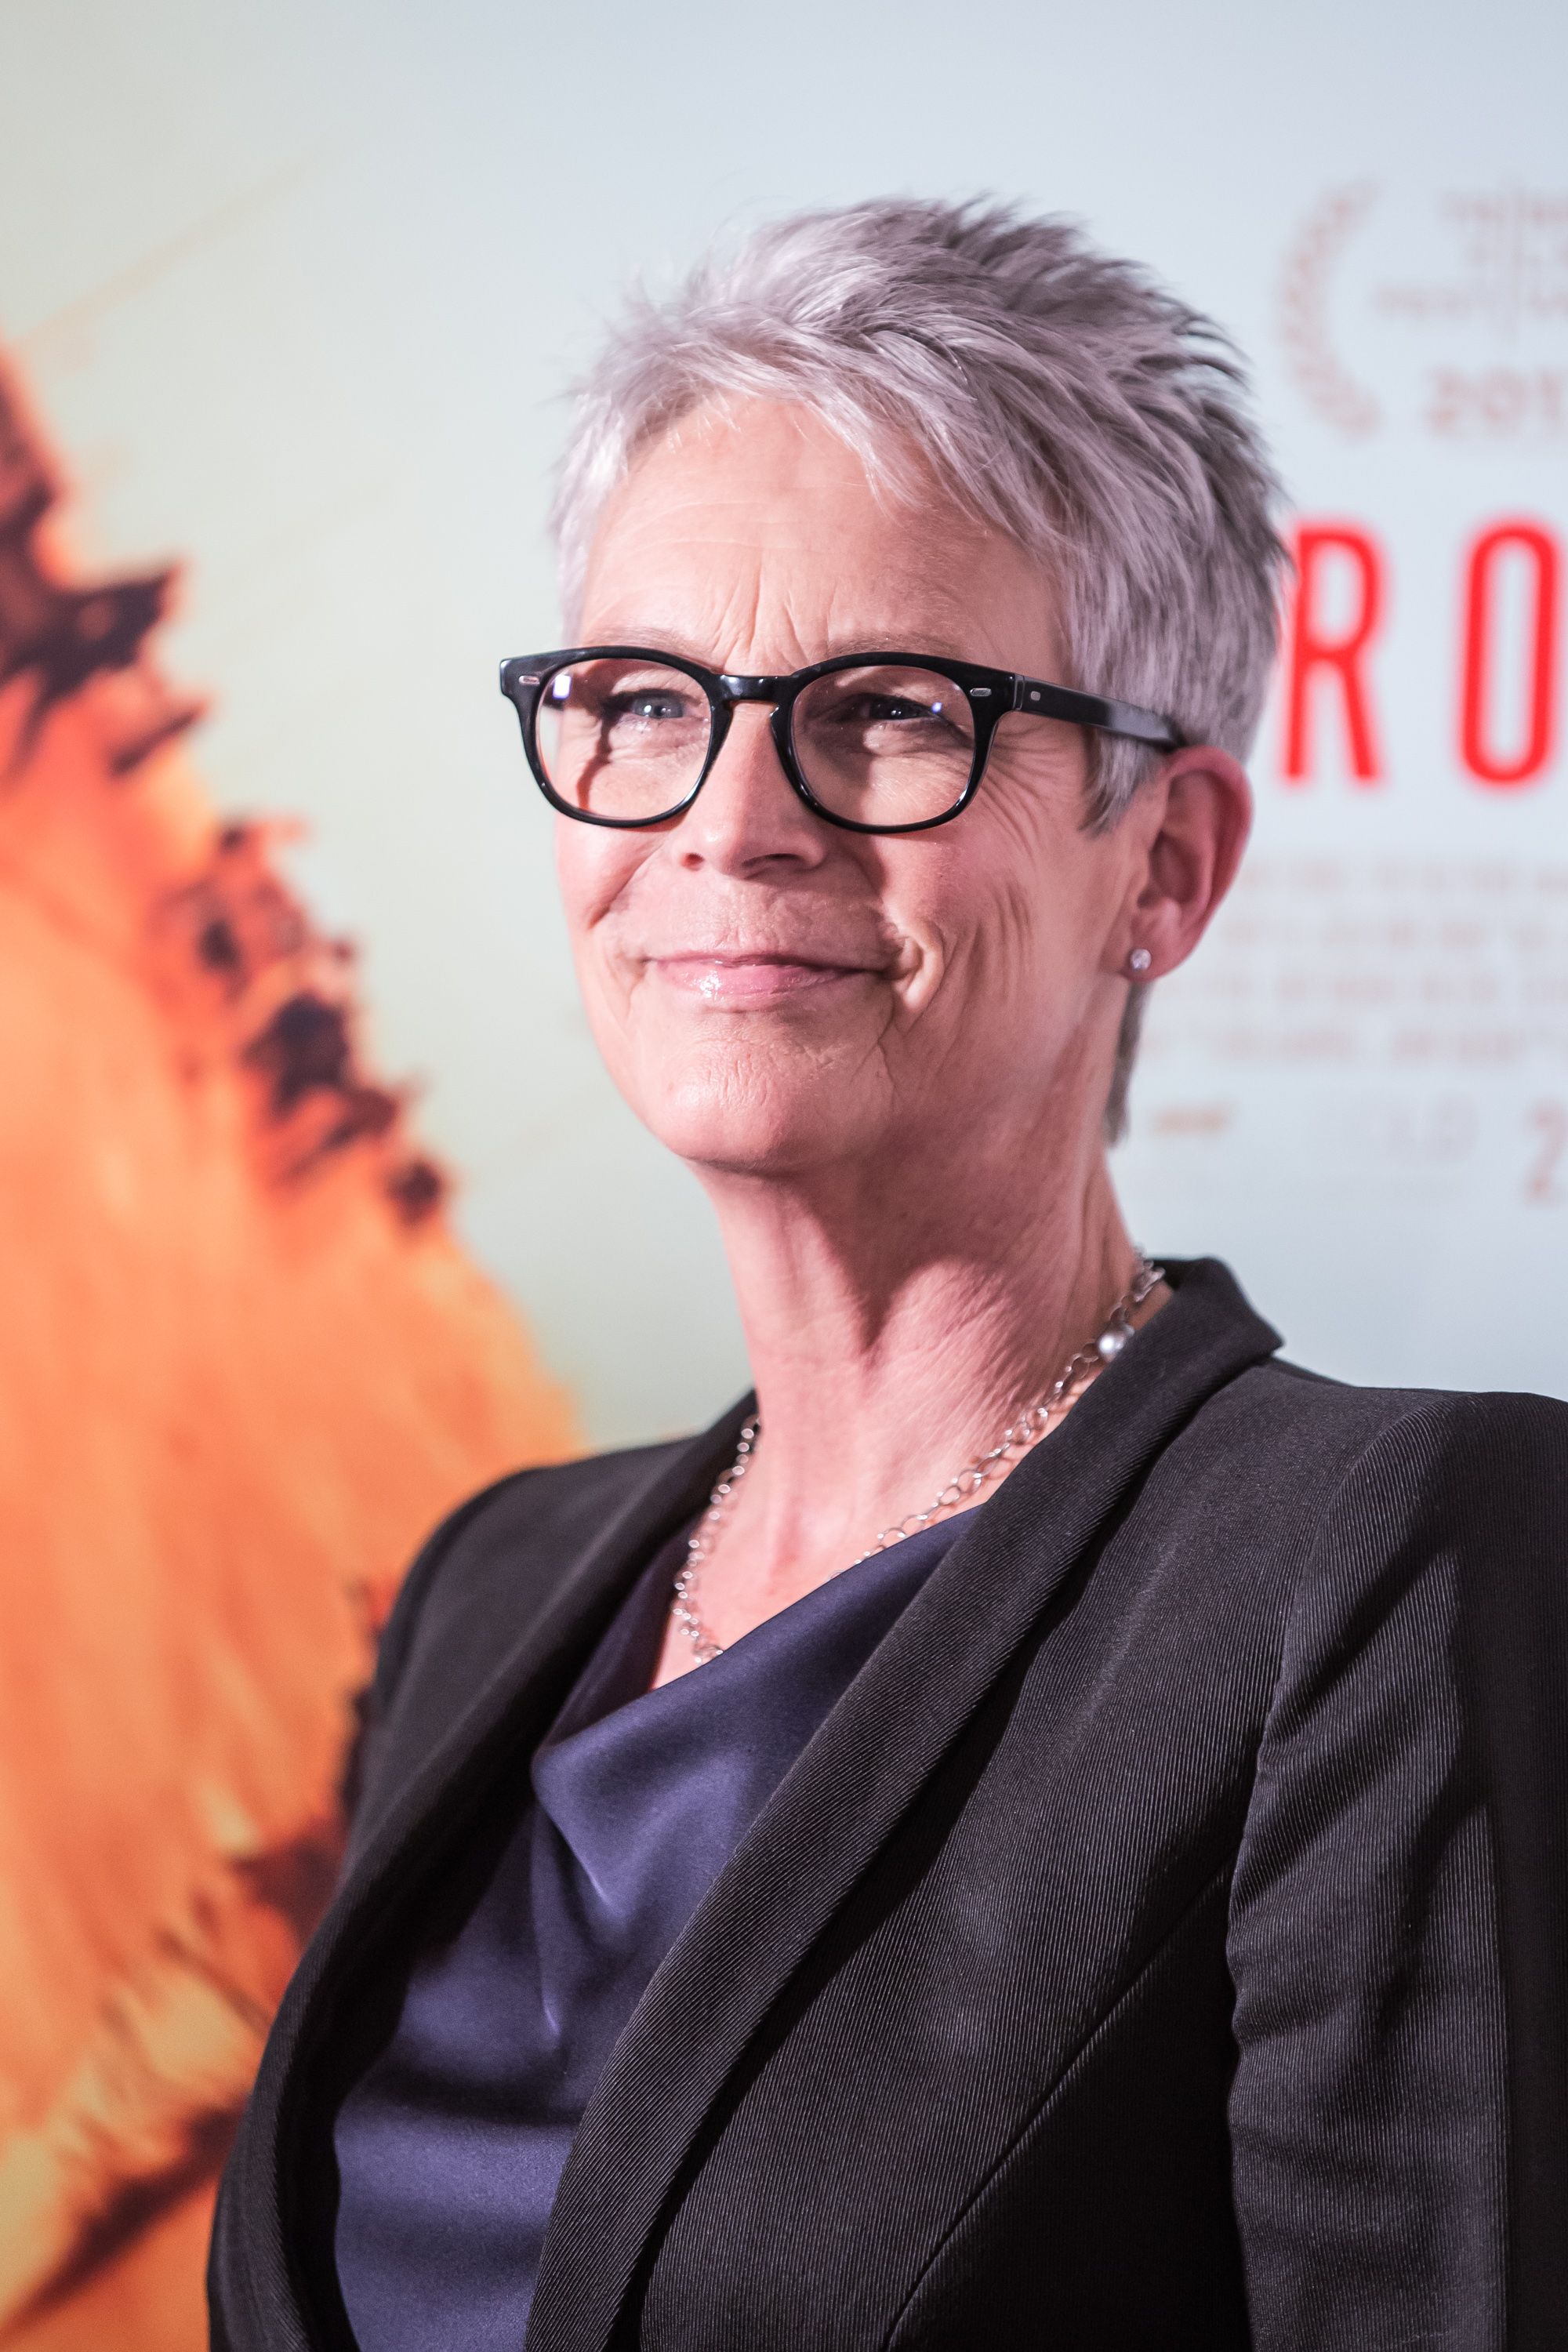 laurie strode newr glasses from halloween 2020 Jamie Lee Curtis Returns As Laurie Strode For Next Installment Of Halloween laurie strode newr glasses from halloween 2020